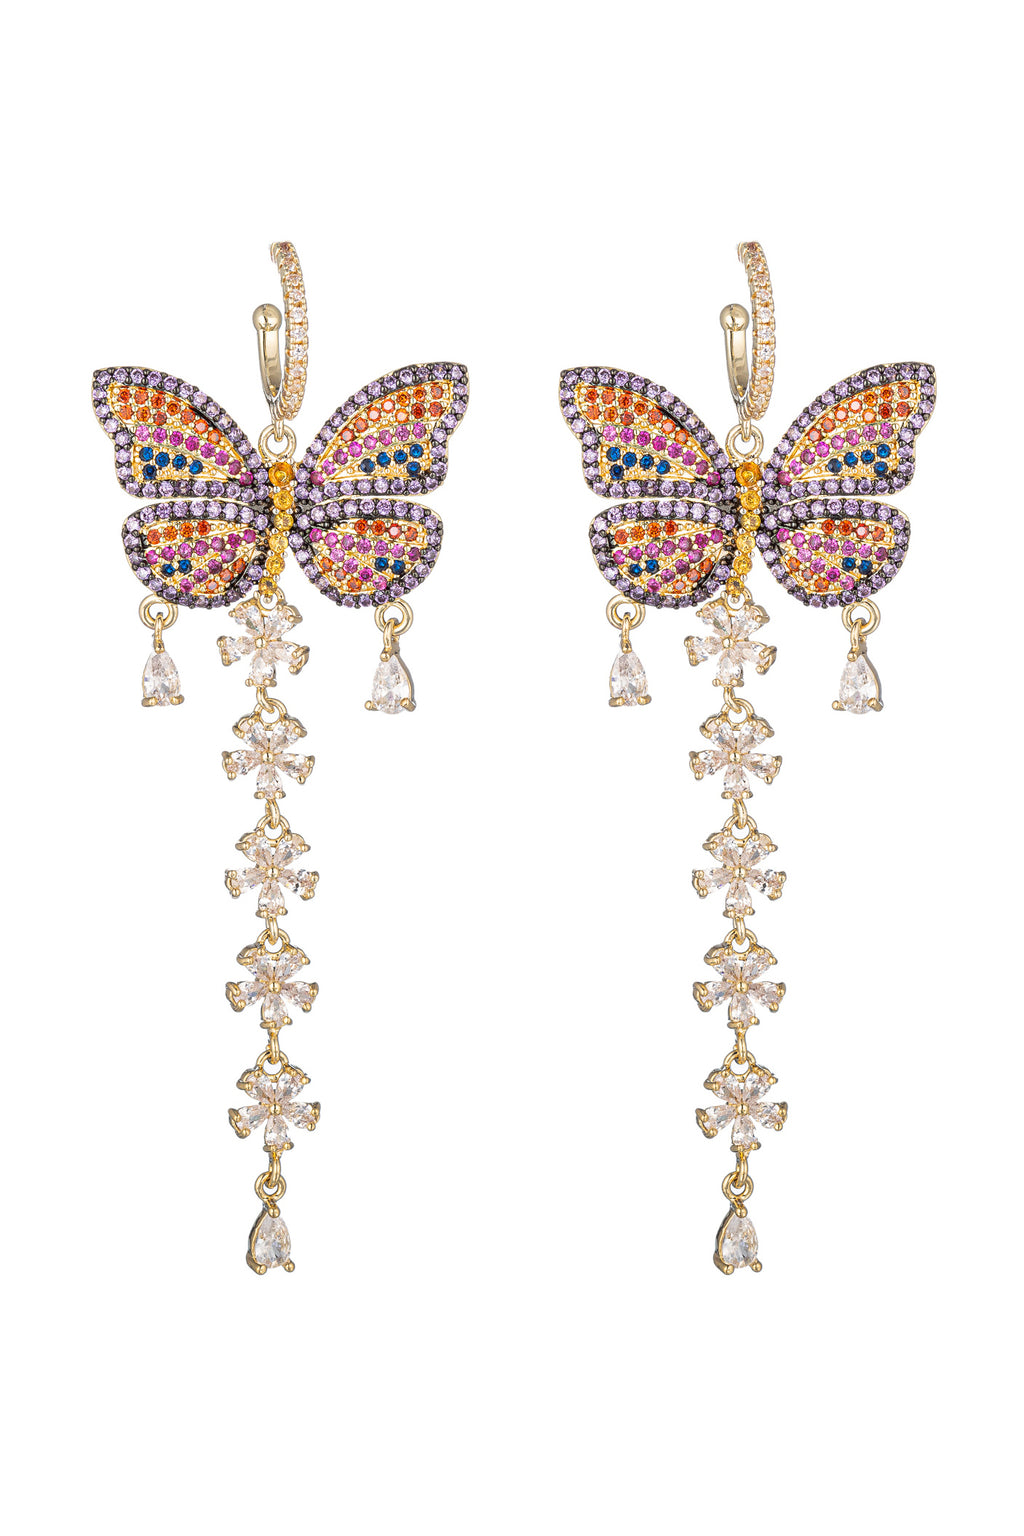 Gold tone brass pink butterfly huggie earrings studded with multicolored CZ crystals.